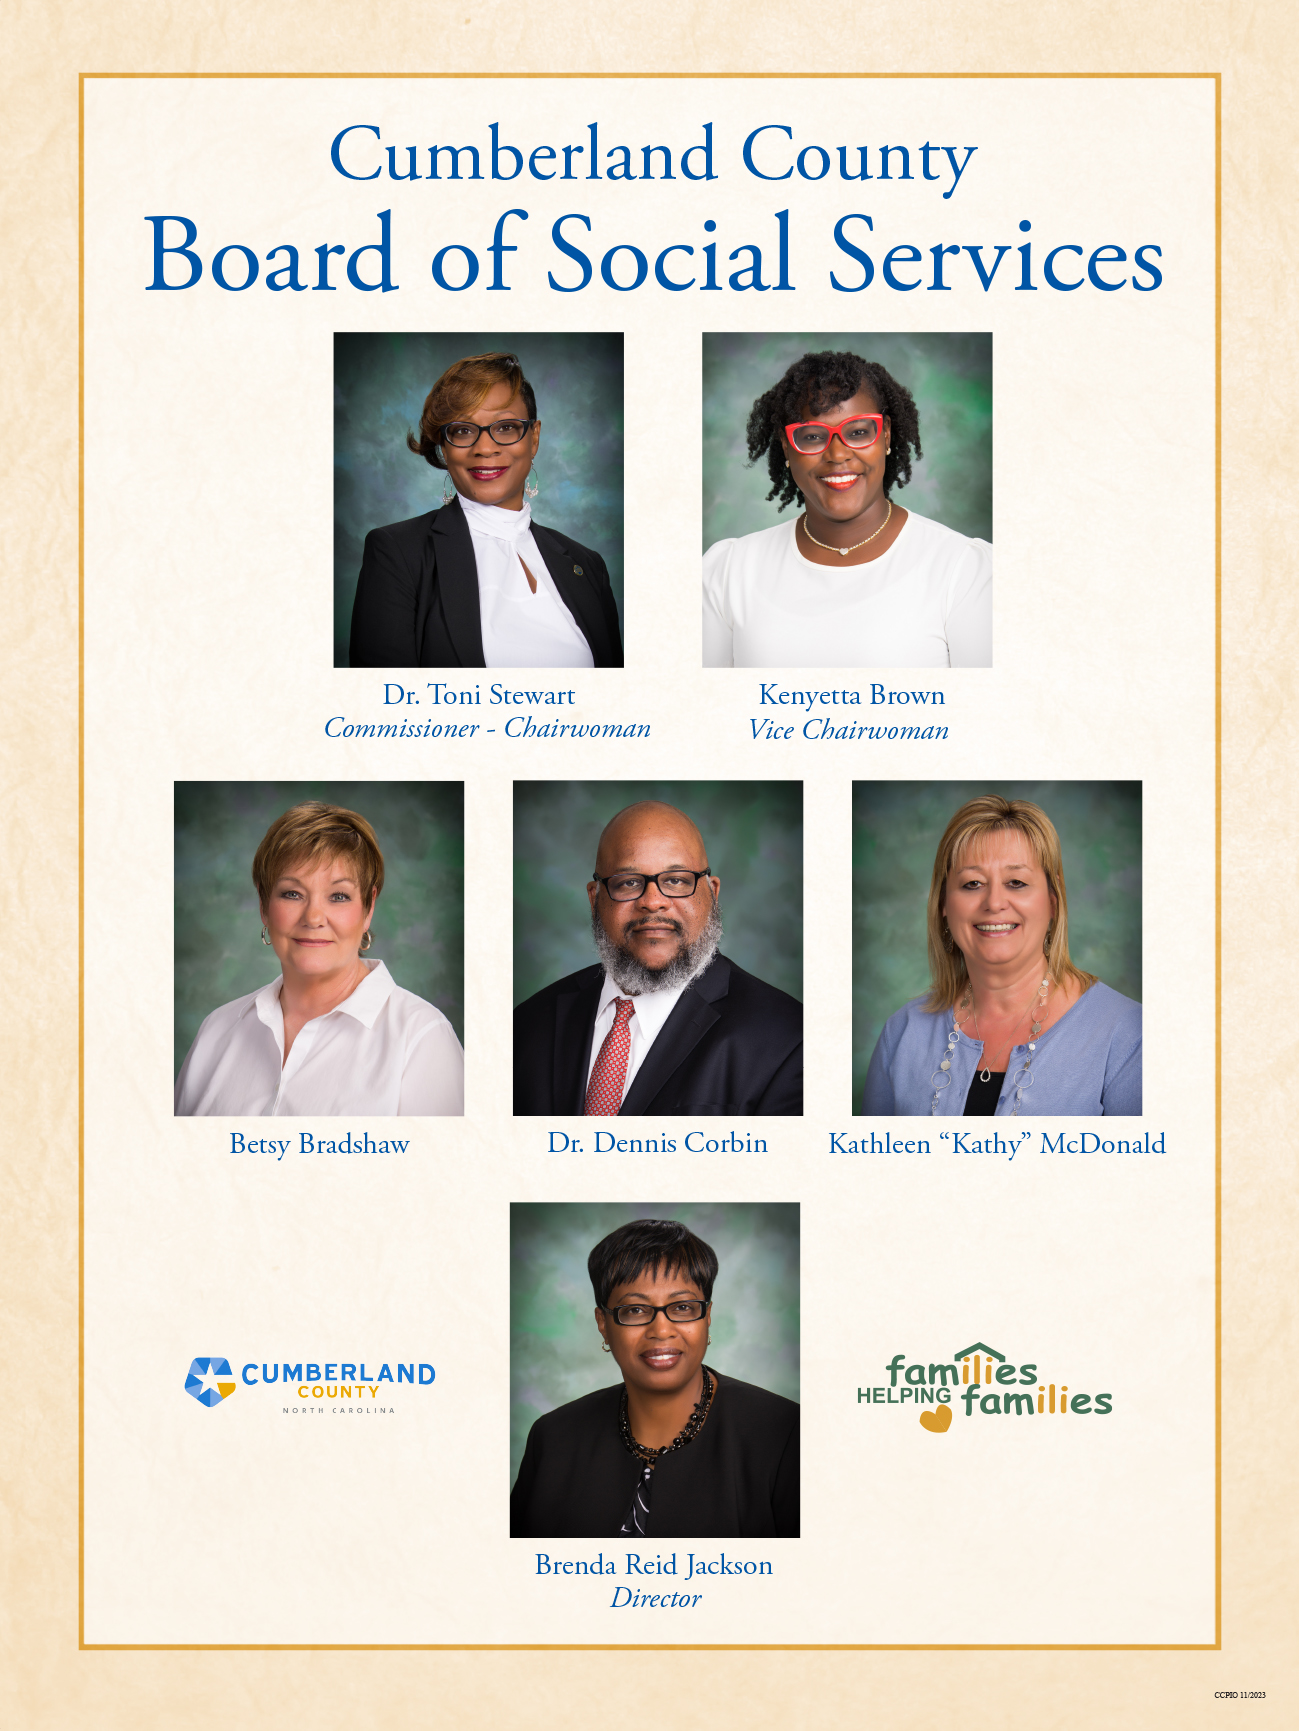 photos of Social Services board members